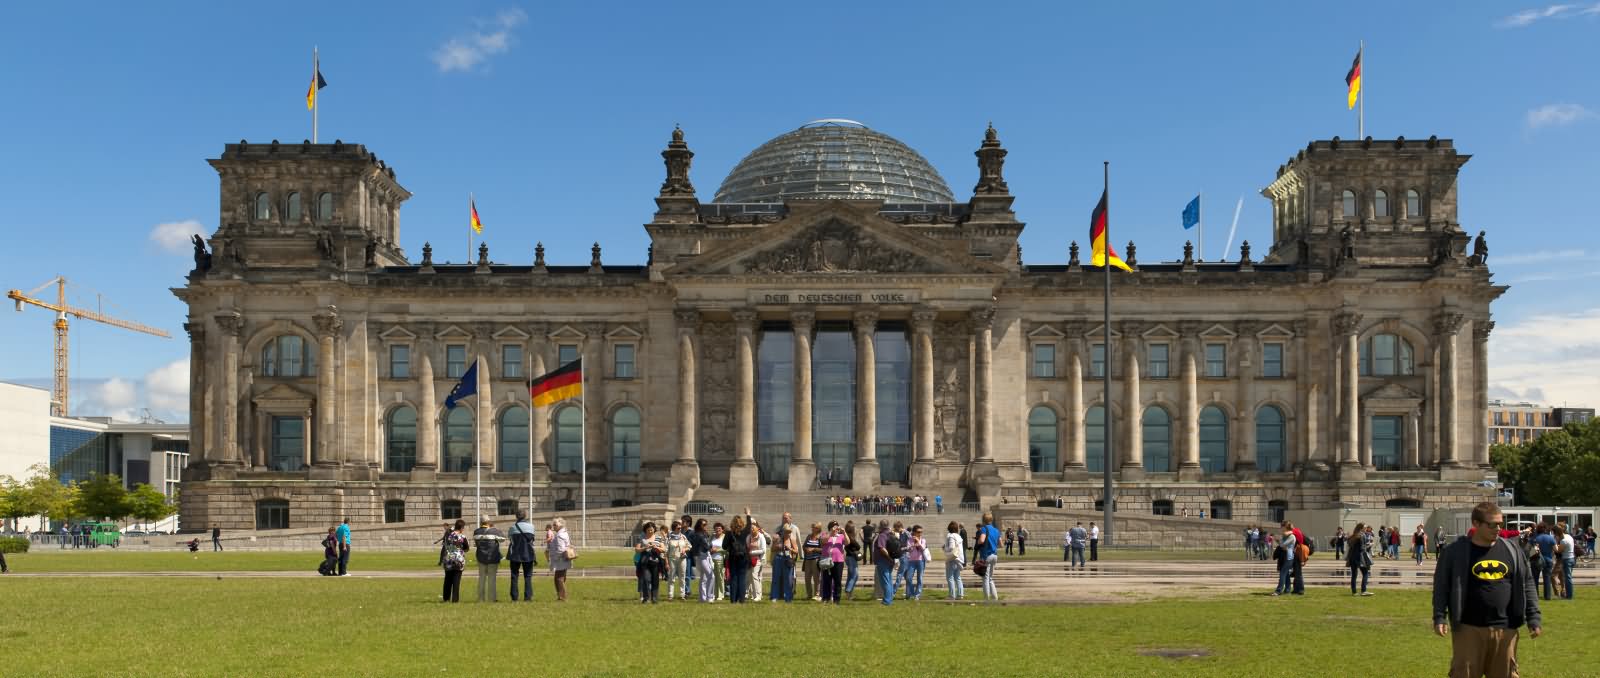 Adorable View Of The Reichstag In Berlin